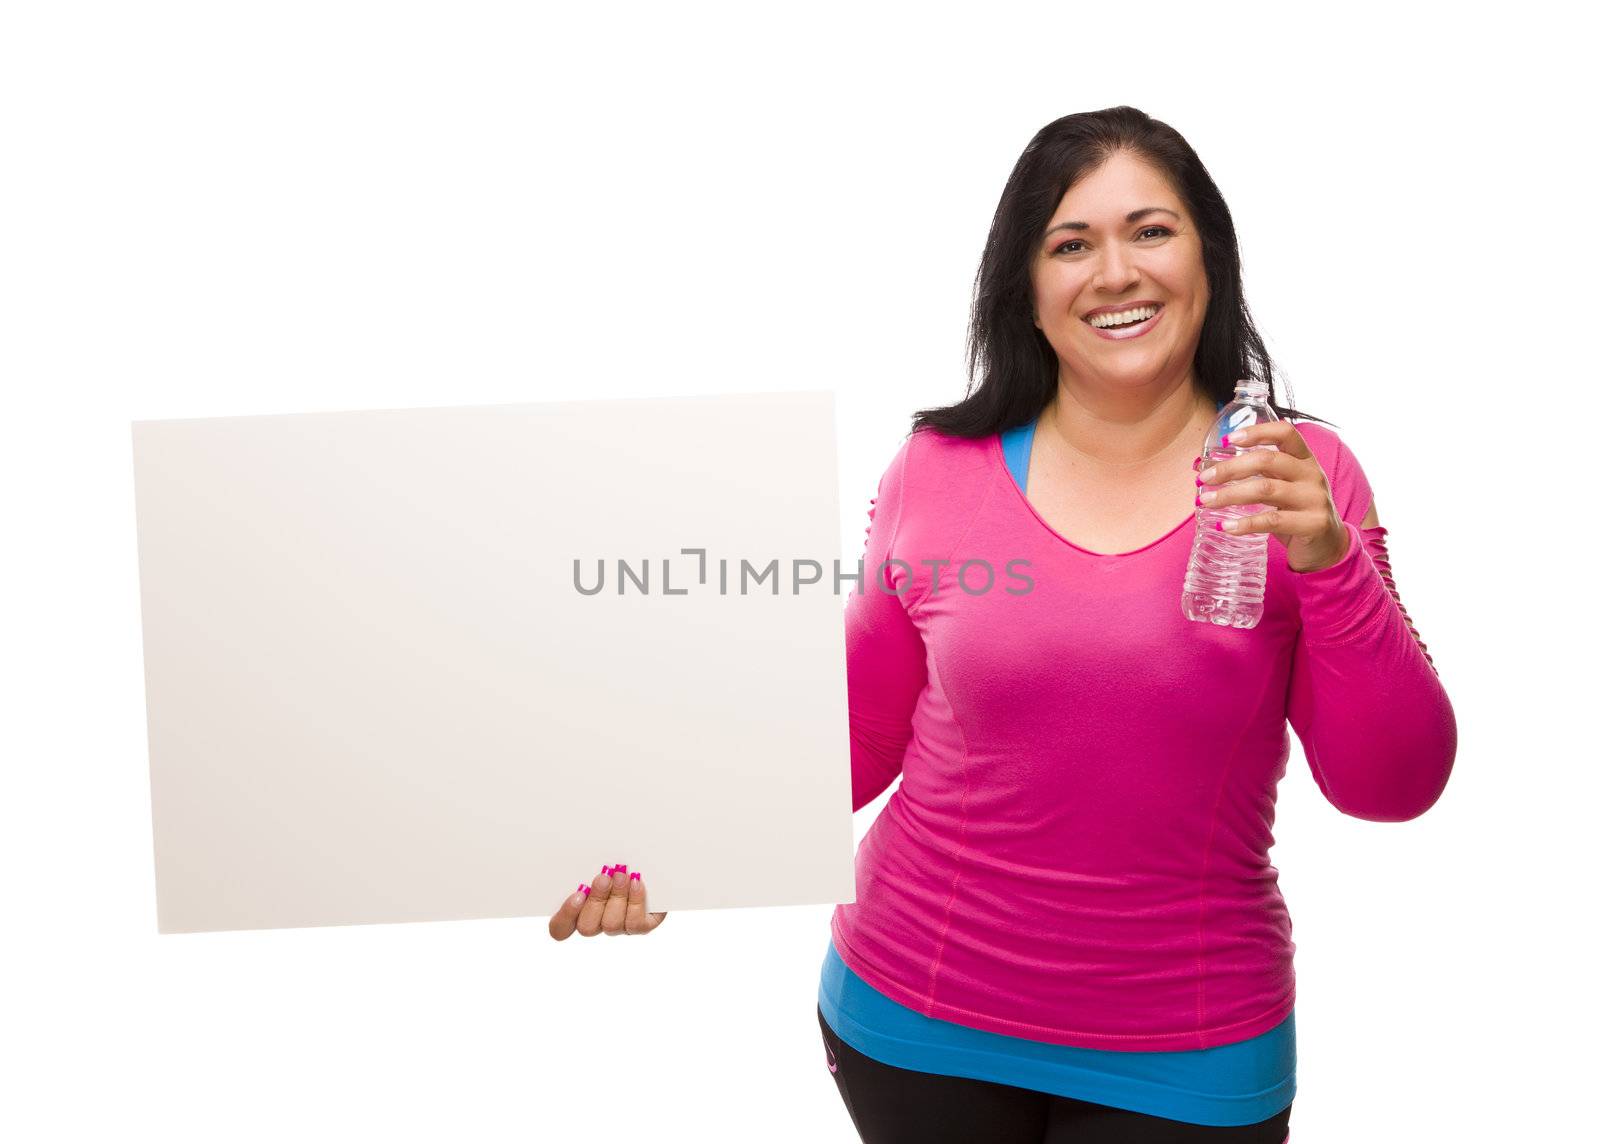 Attractive Middle Aged Hispanic Woman In Workout Clothes with Water Bottle and Blank White Sign Against a White Background.